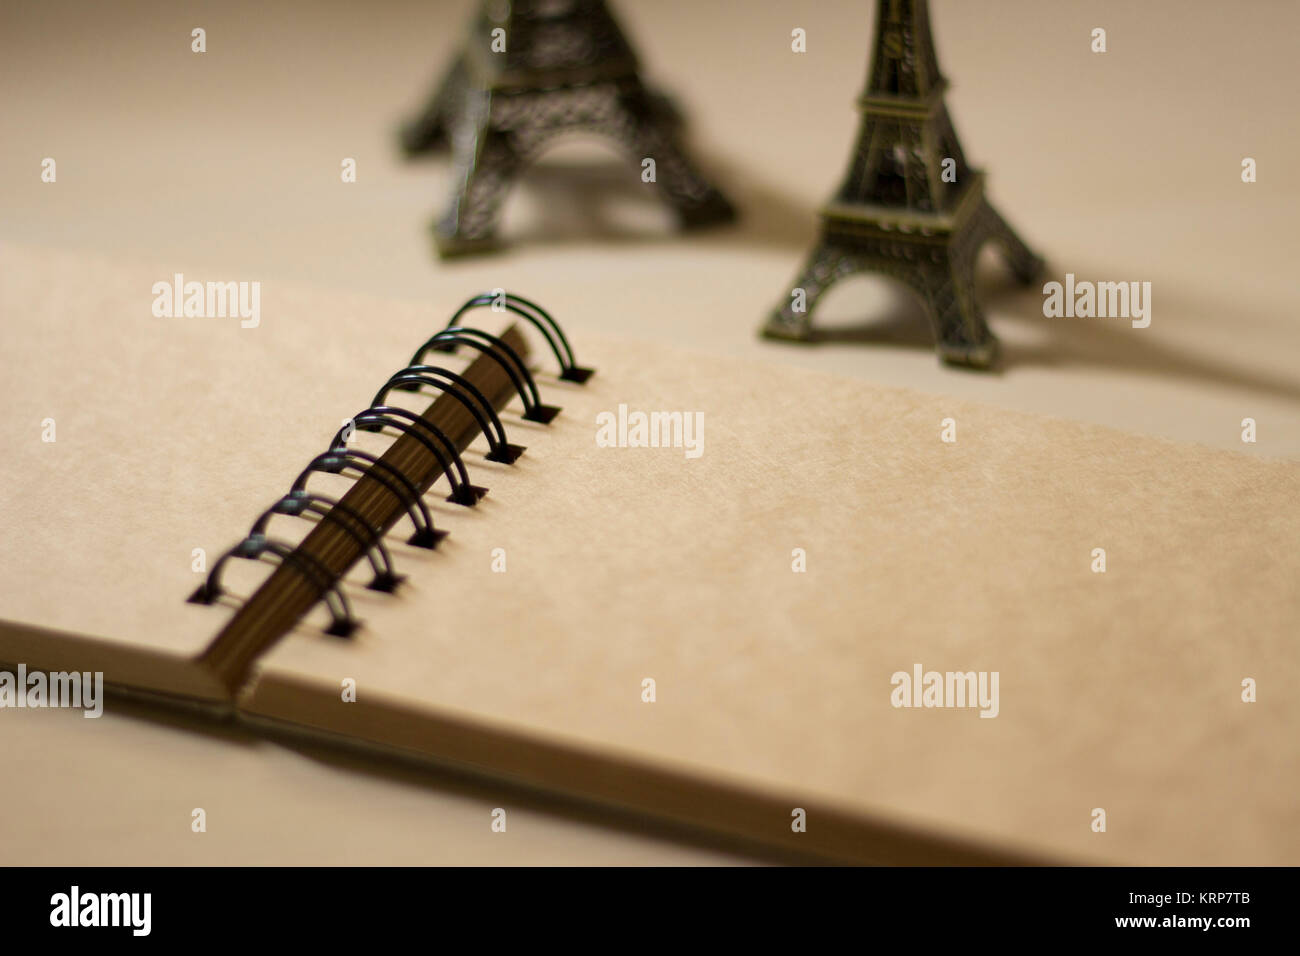 Miniature Eiffel towers and a sketch book Stock Photo